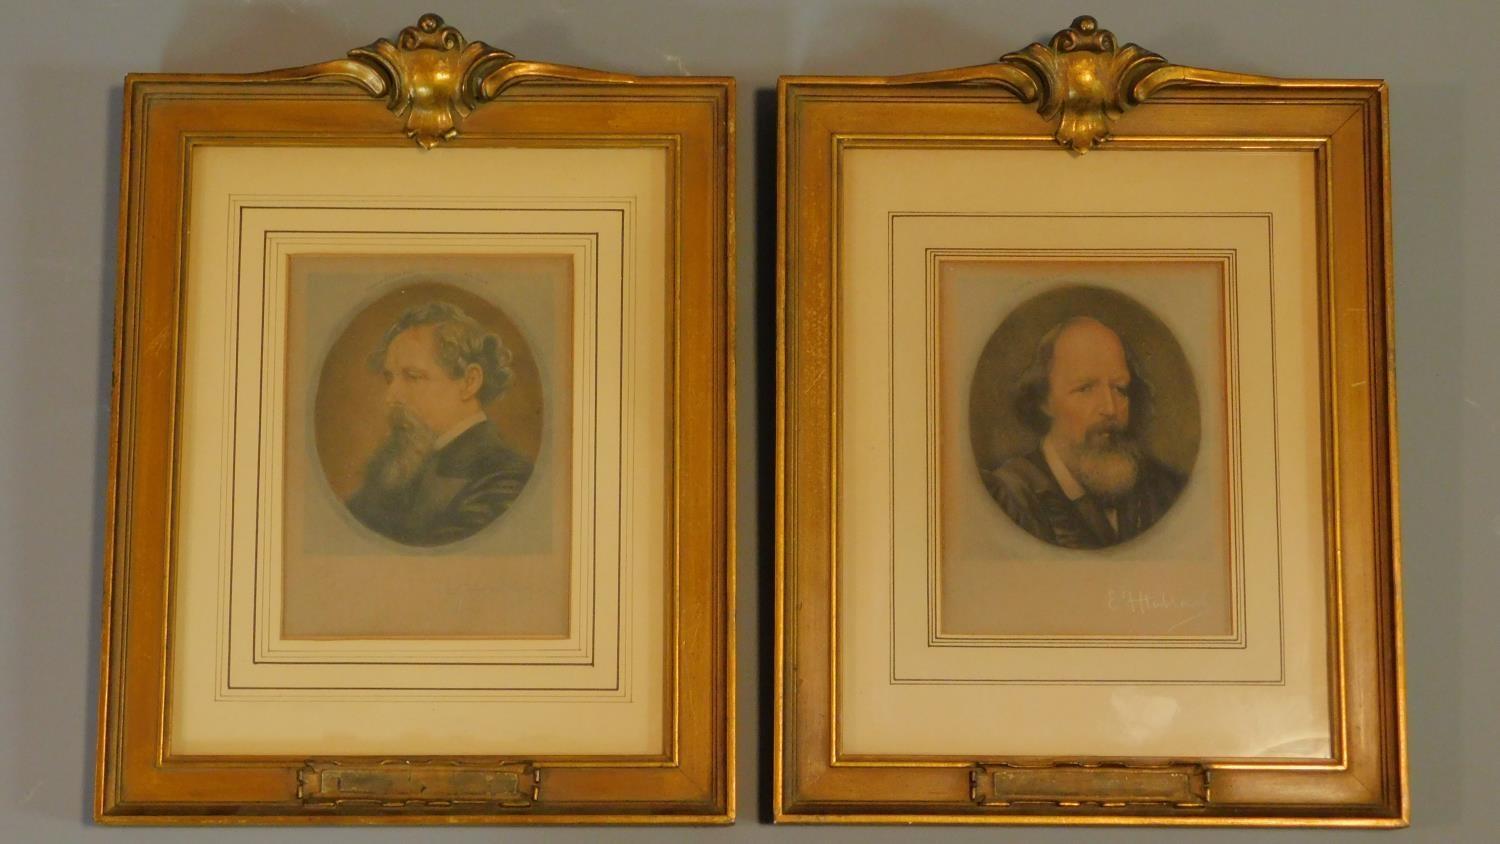 Two signed prints by E. F. Hubbard, one of Charles Dickens the other of Alfred Tennyson. 31x24cm